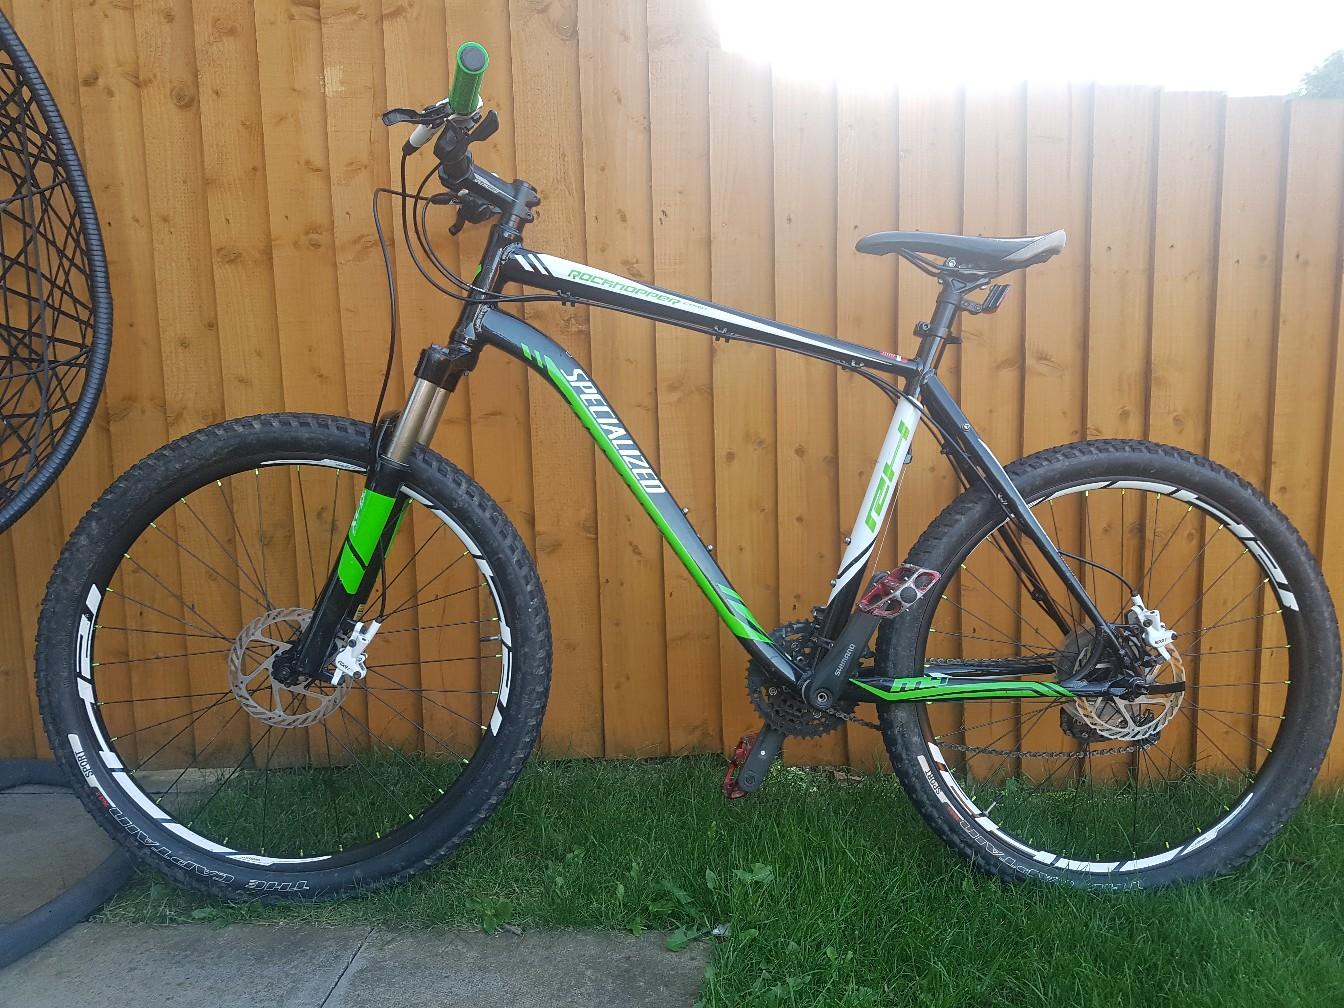 specialized rockhopper black and green